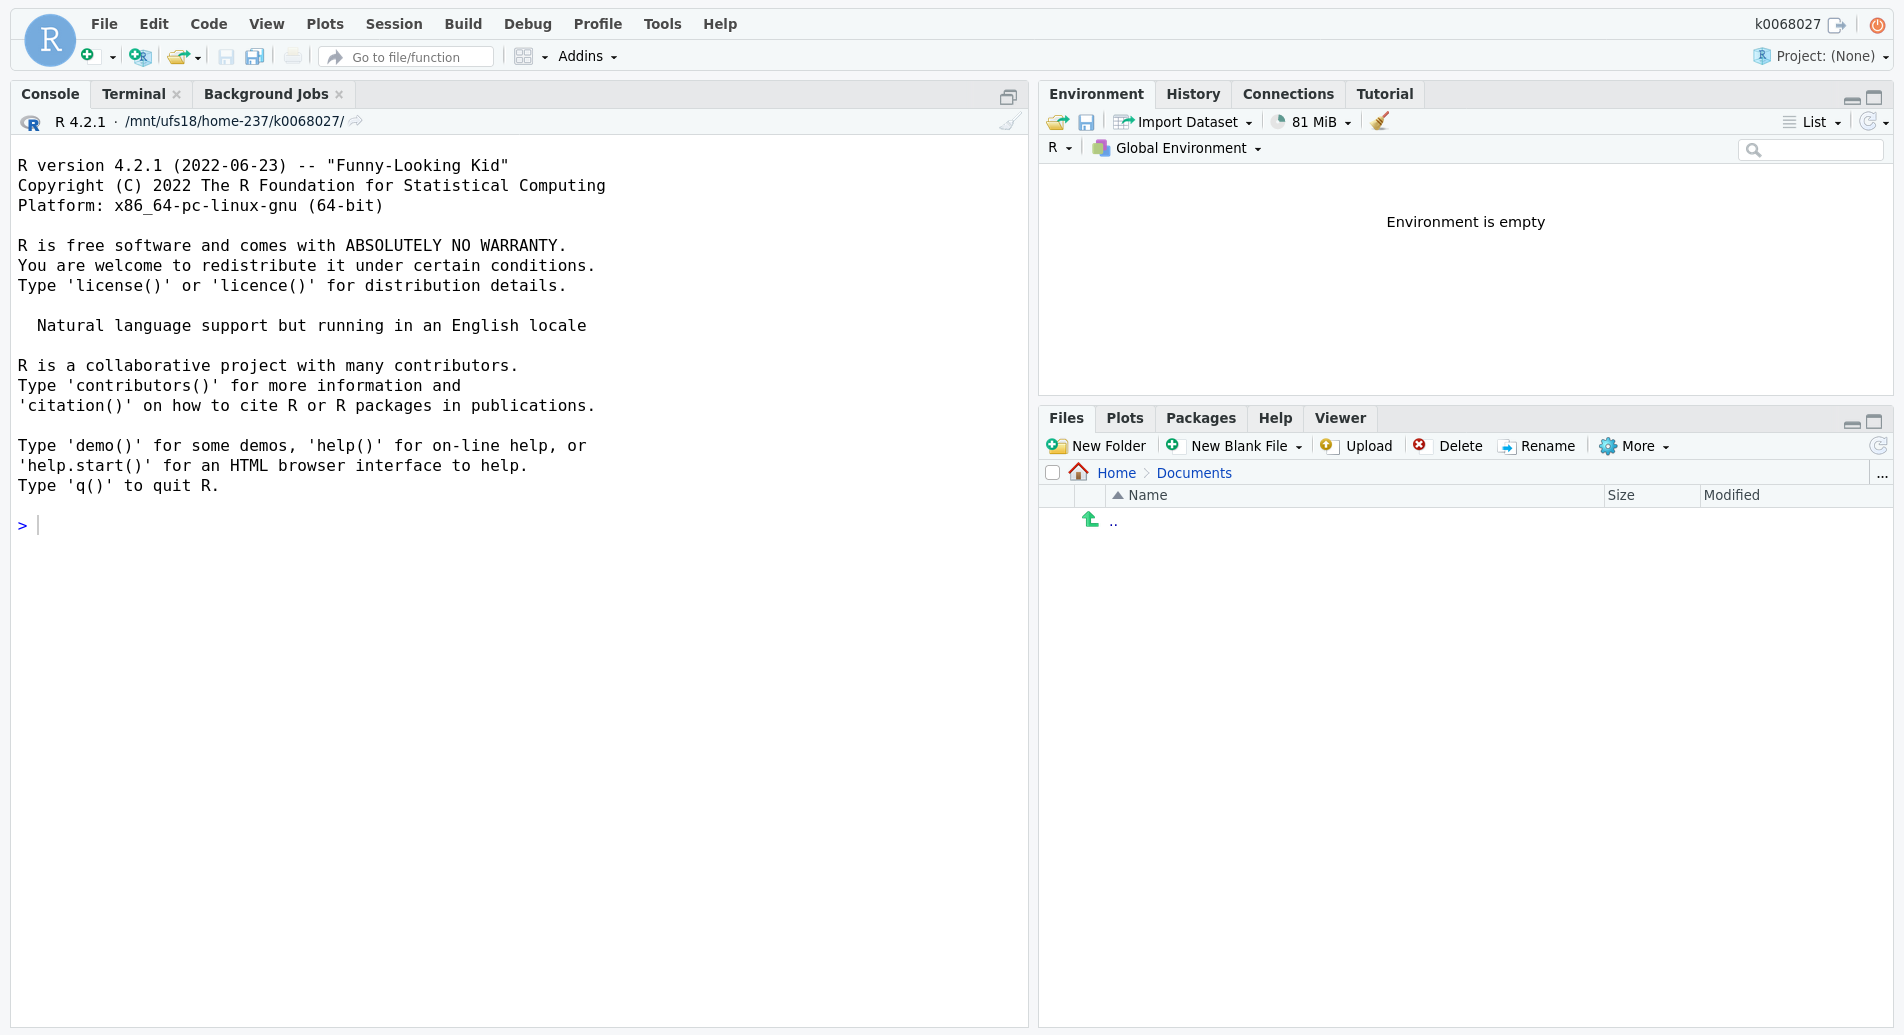 An RStudio Server session. An R console takes up the left half of RStudio, and the right half is split between an environment section on top and a file browser on bottom.